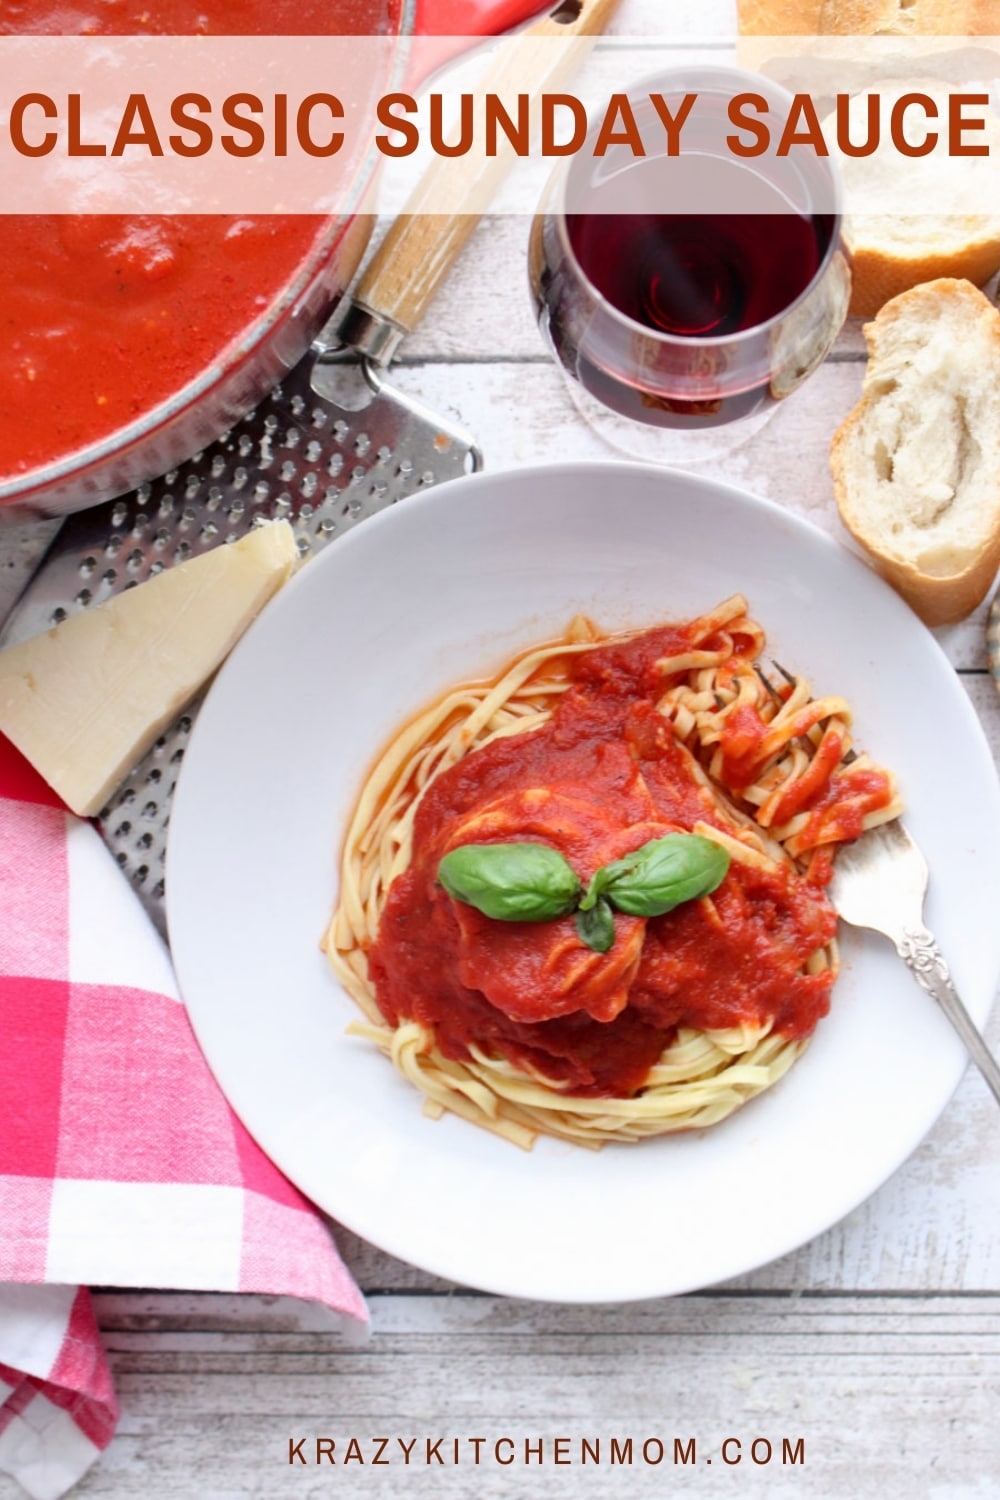 The secret to a perfect Sunday Sauce is to cook it low and slow for several hours. No rush and little fuss. It's worth every minute you wait. via @krazykitchenmom